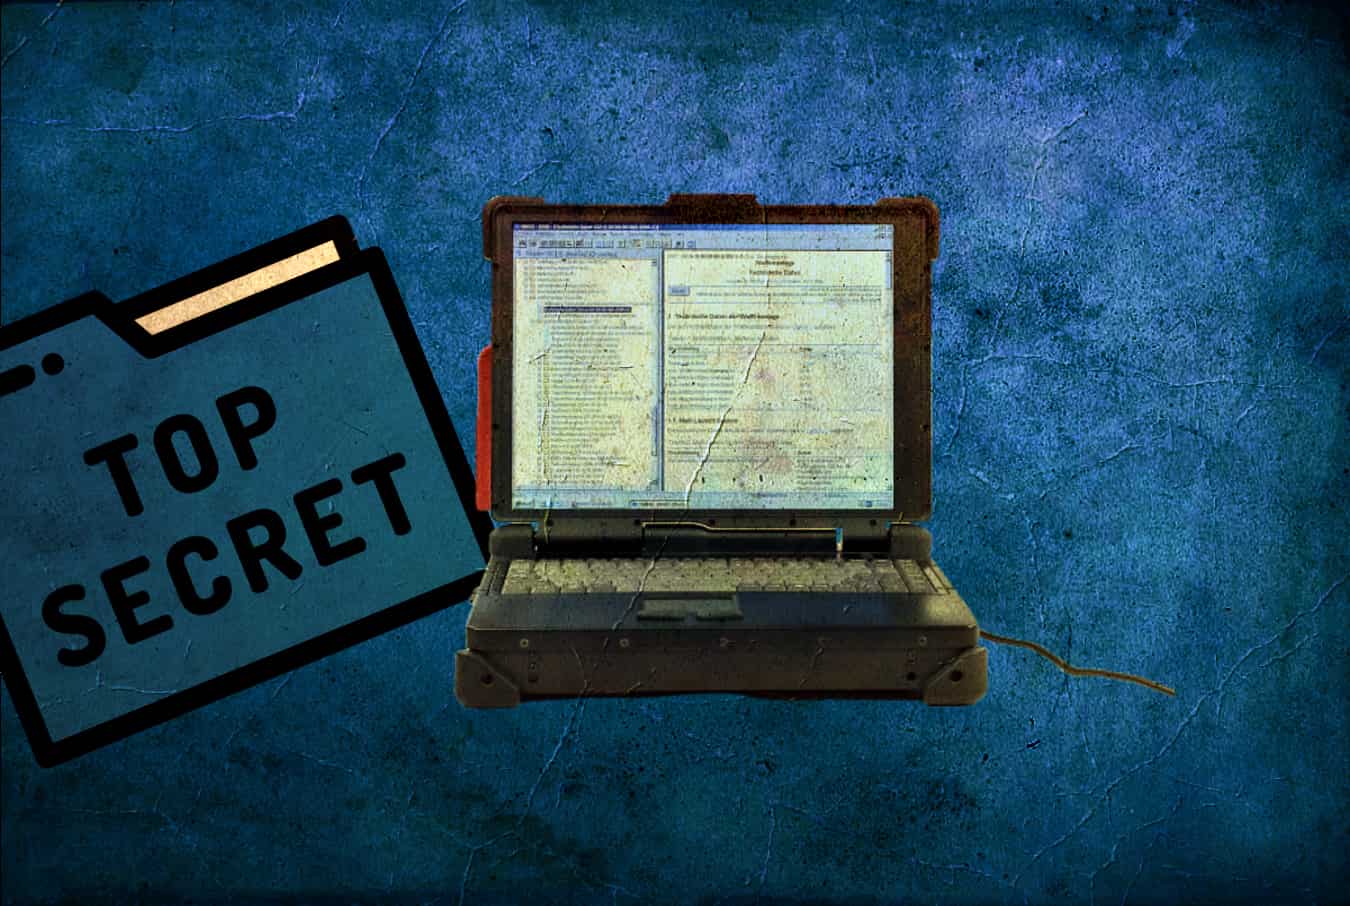 Researchers find German army secrets on laptop bought from eBay